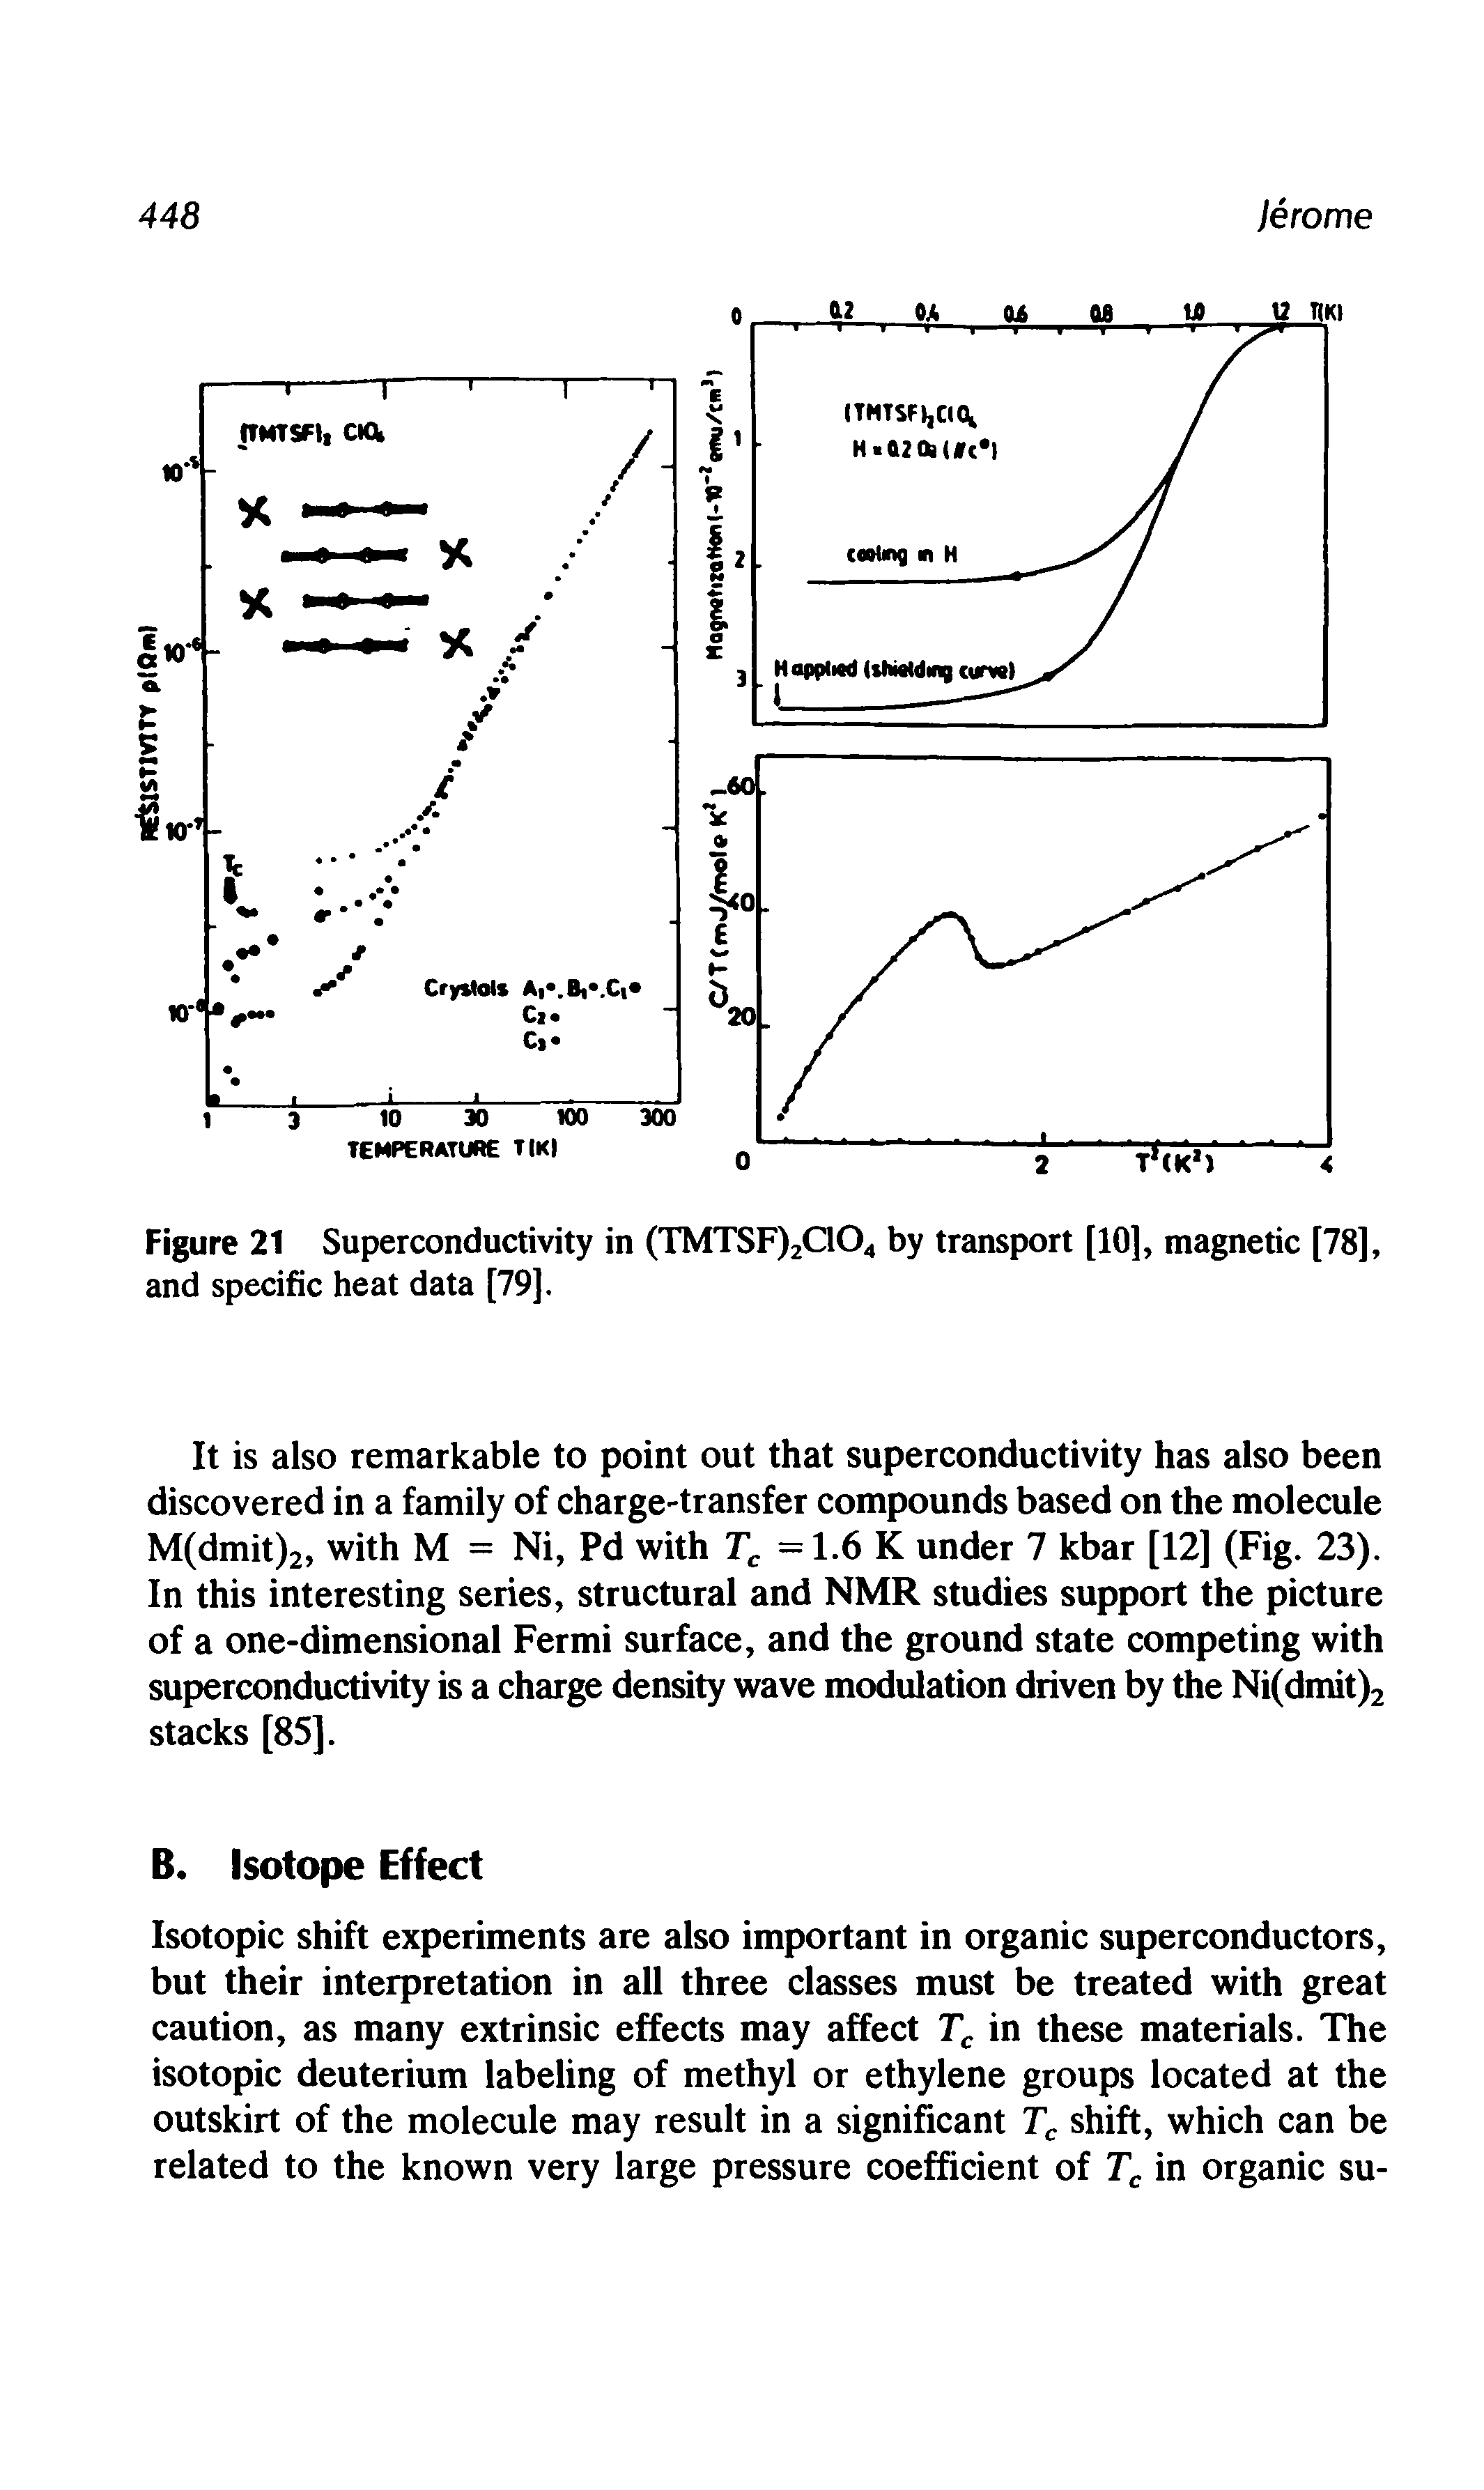 Figure 21 Superconductivity in (TMTSF)2C104 by transport [10], magnetic [78], and specific heat data [79].